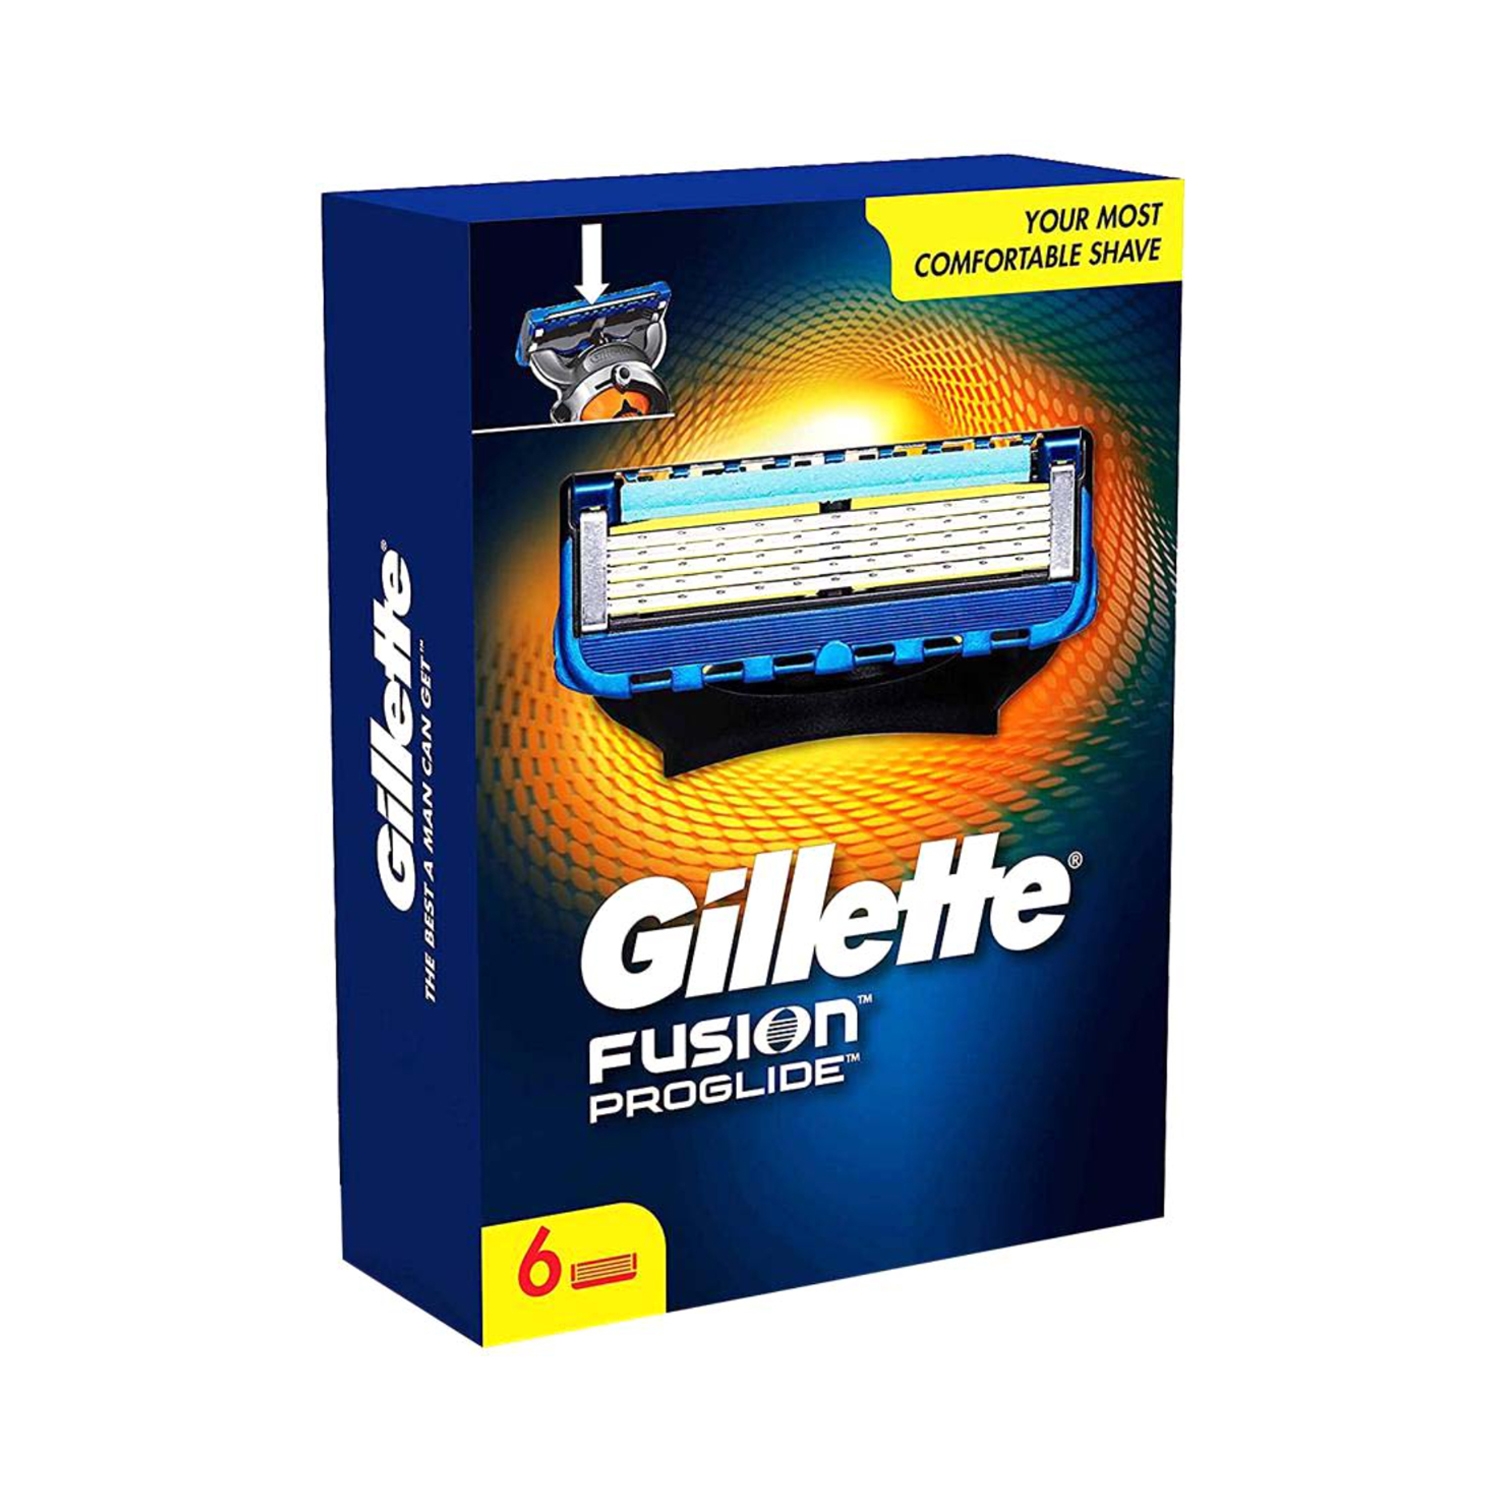 Gillette | Gillette Fusion Proglide Blades for Perfect Shave and Perfect Beard Shape (6Pcs)